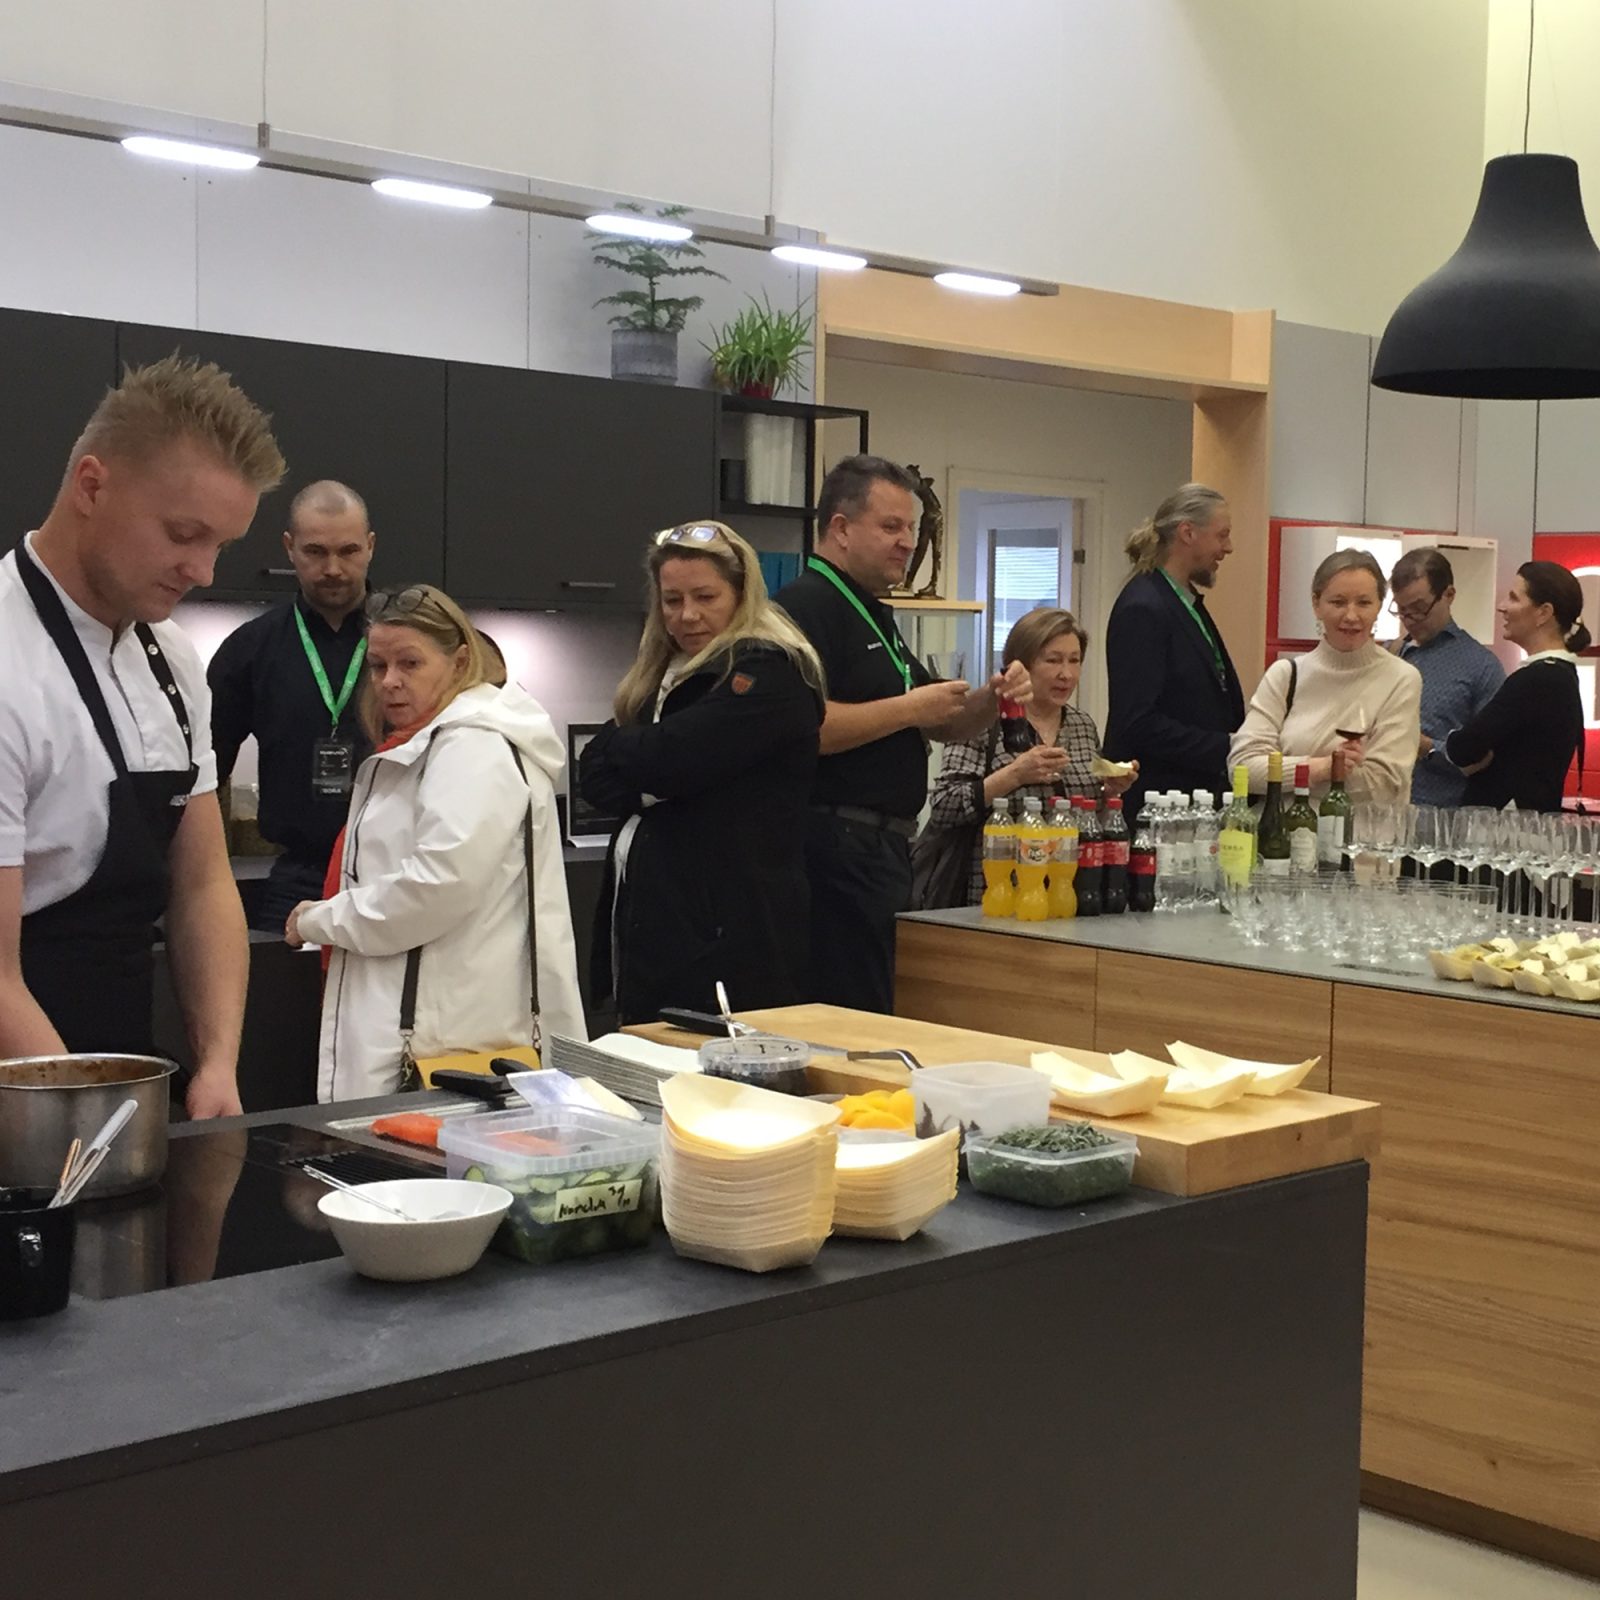 Our customers enjoyed themselves at Savo autumn fair exploring our products and novelties. And of course, relishing the dishes made by top chef...